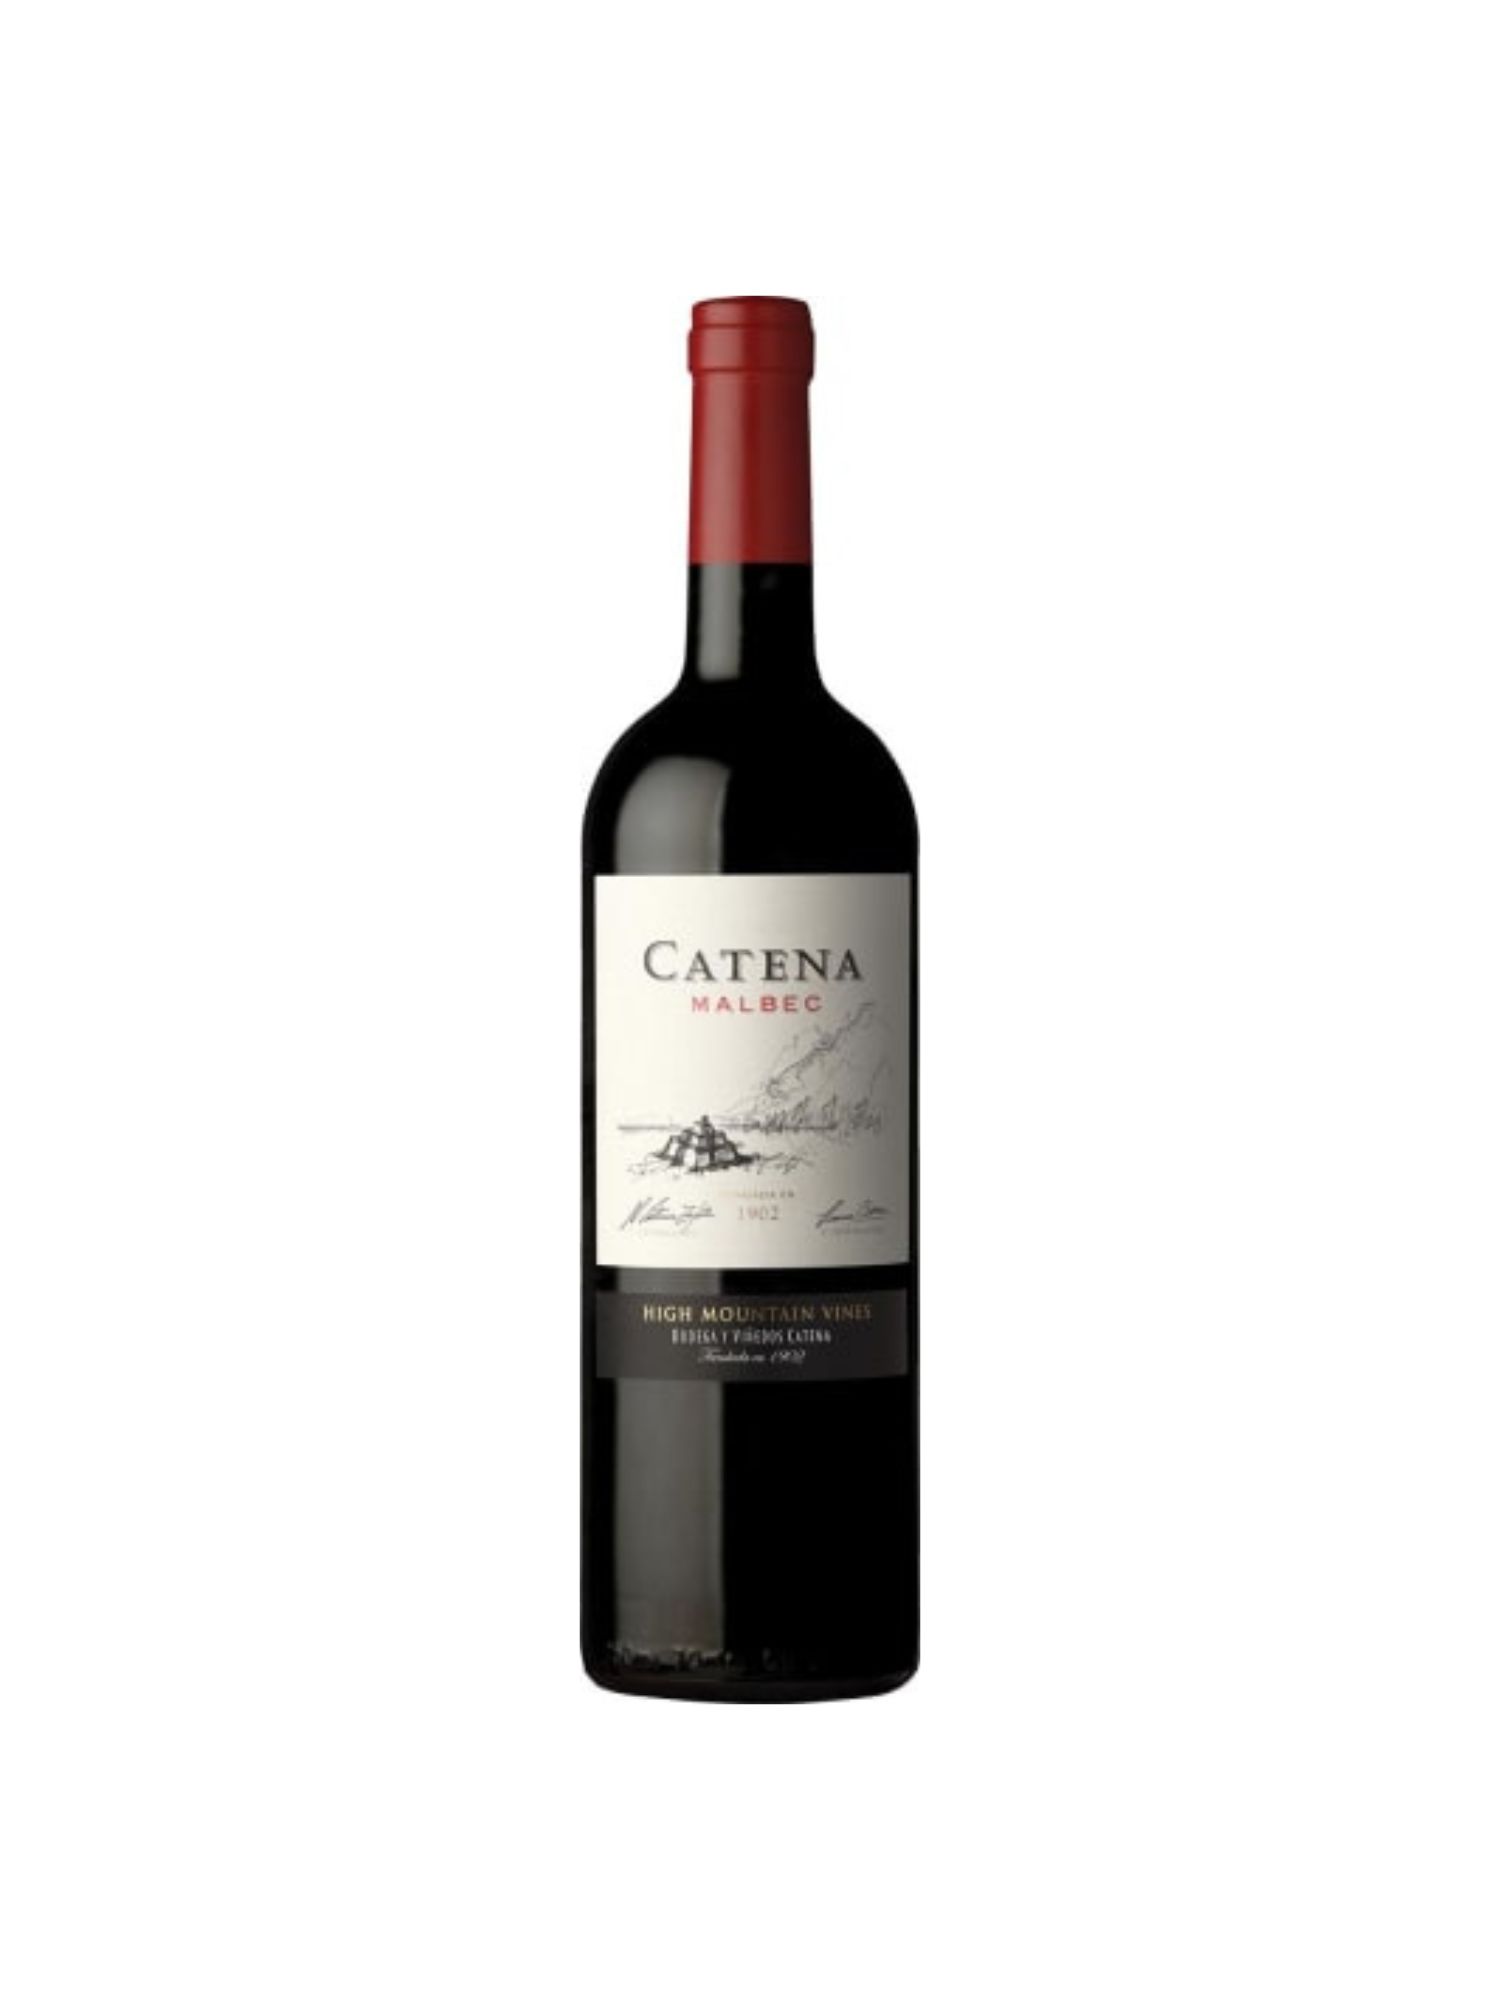 a bottle of malbec which is a low acid red wine